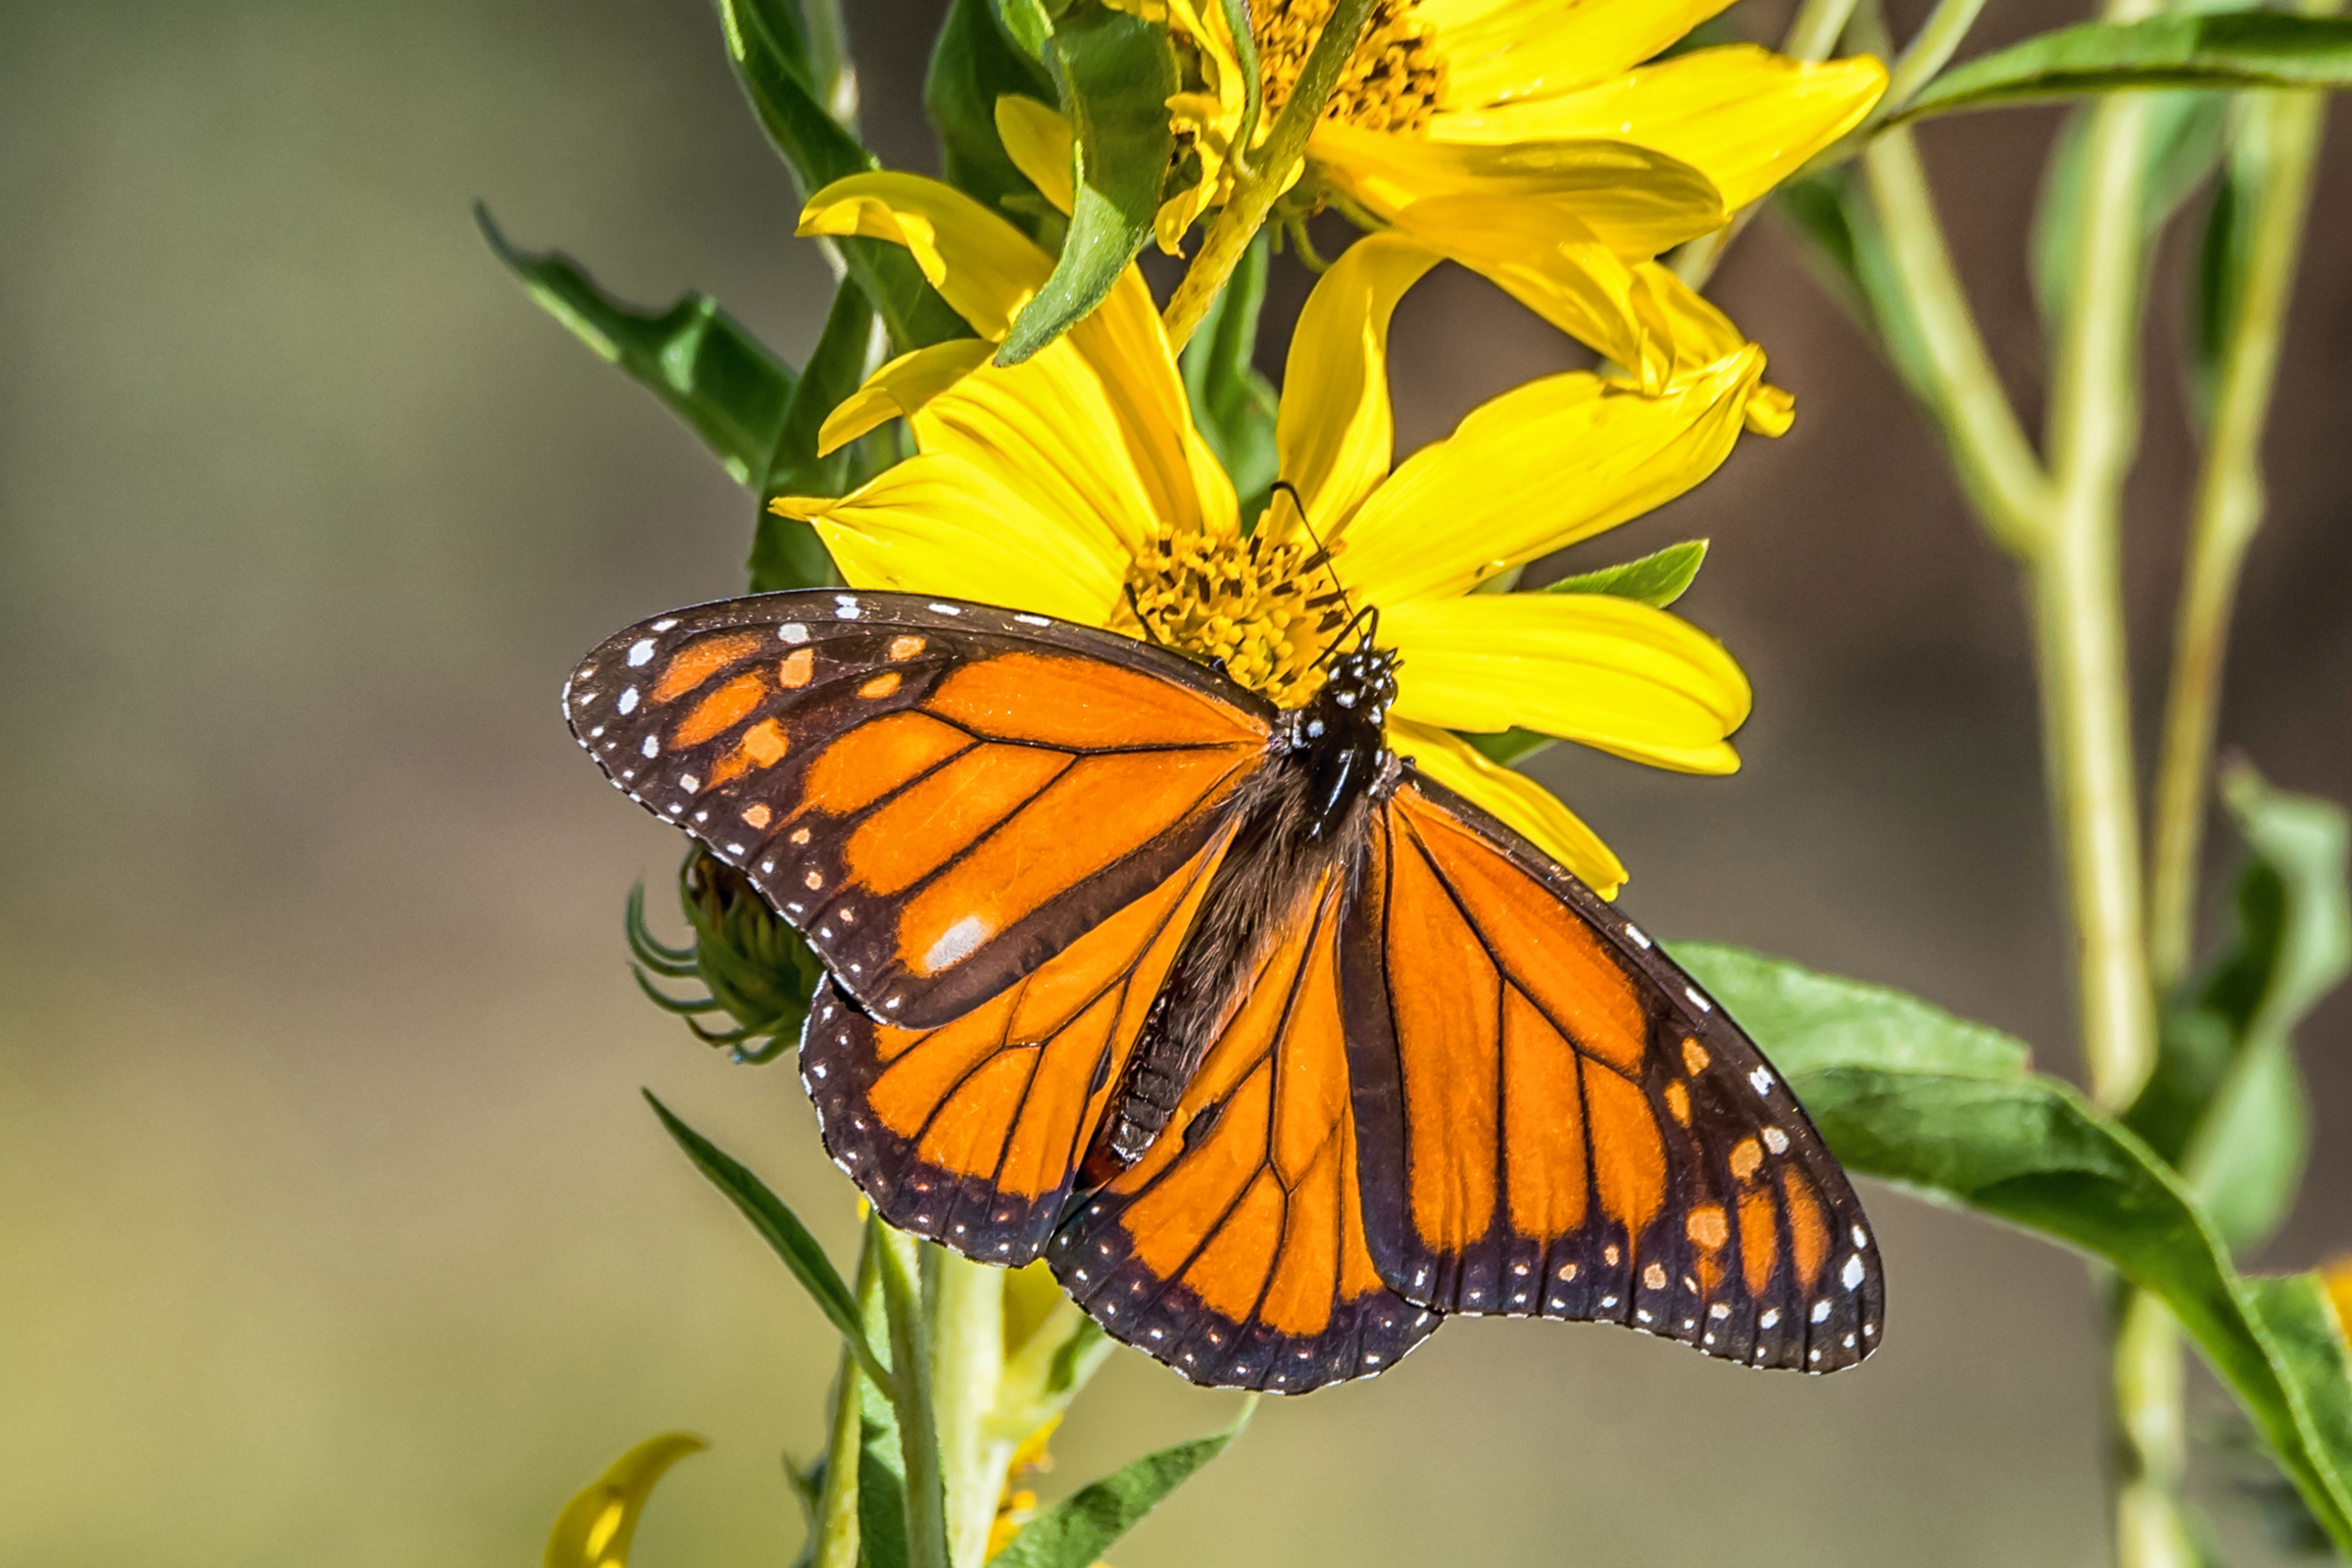 A photo of a monarch butterfly on a yellow flower